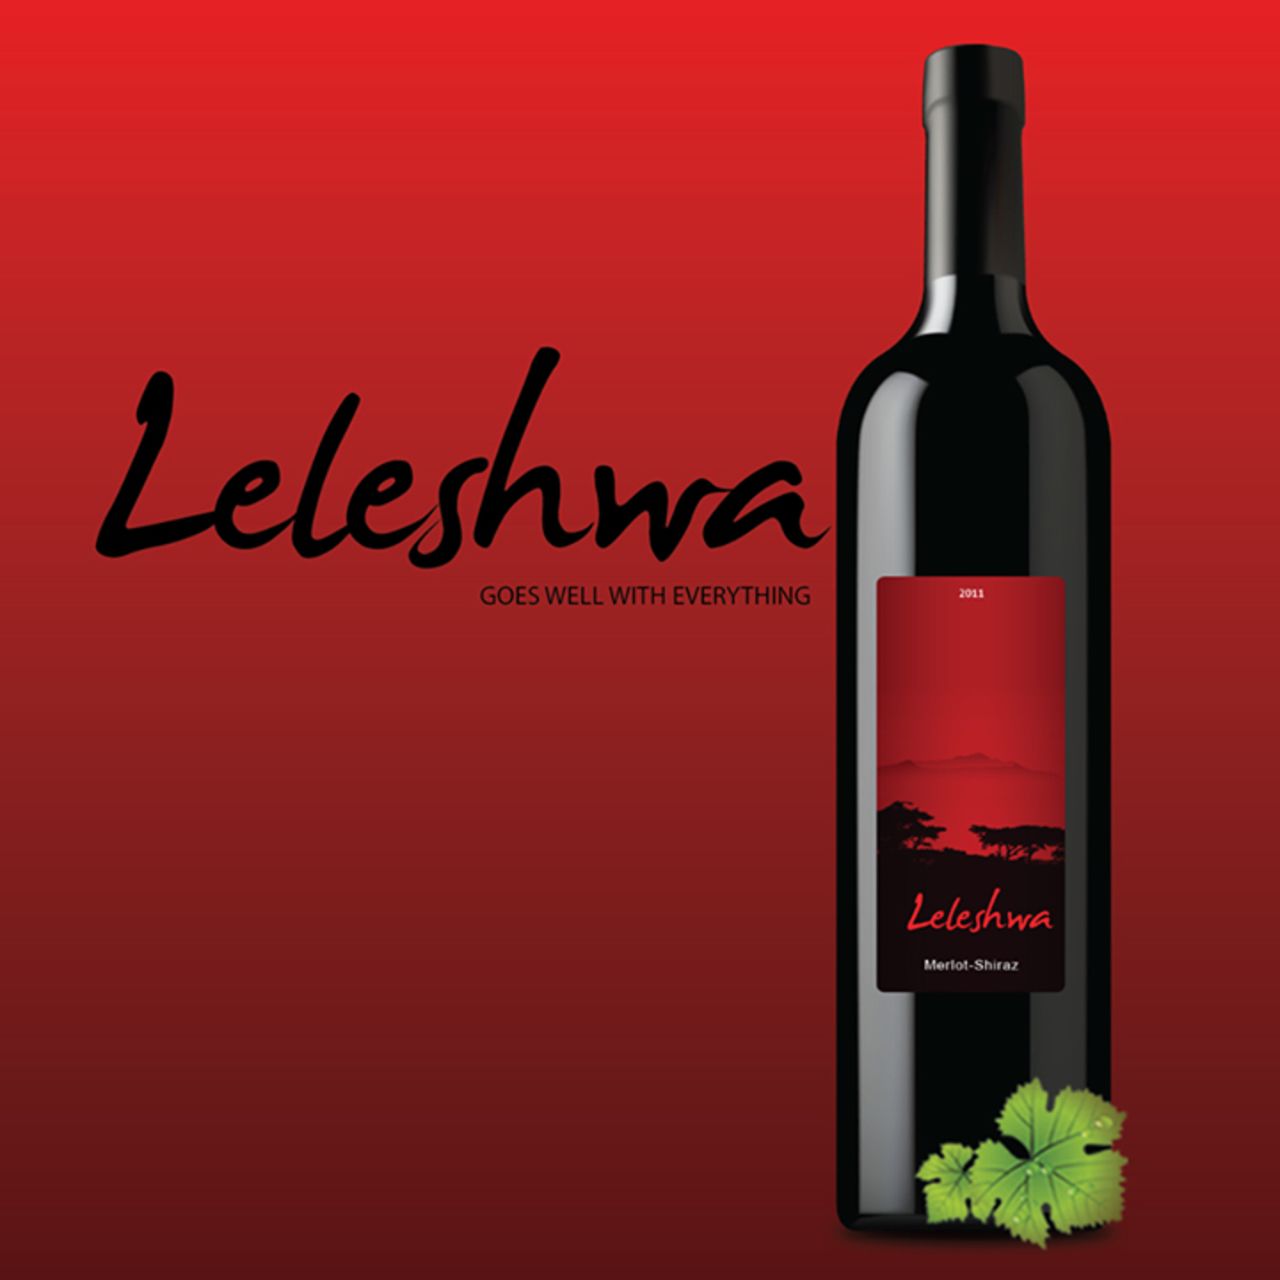 Its makers say Leleshwa is a Maasai word, named for the leleshwa tree, which is common in the Naivasha area.